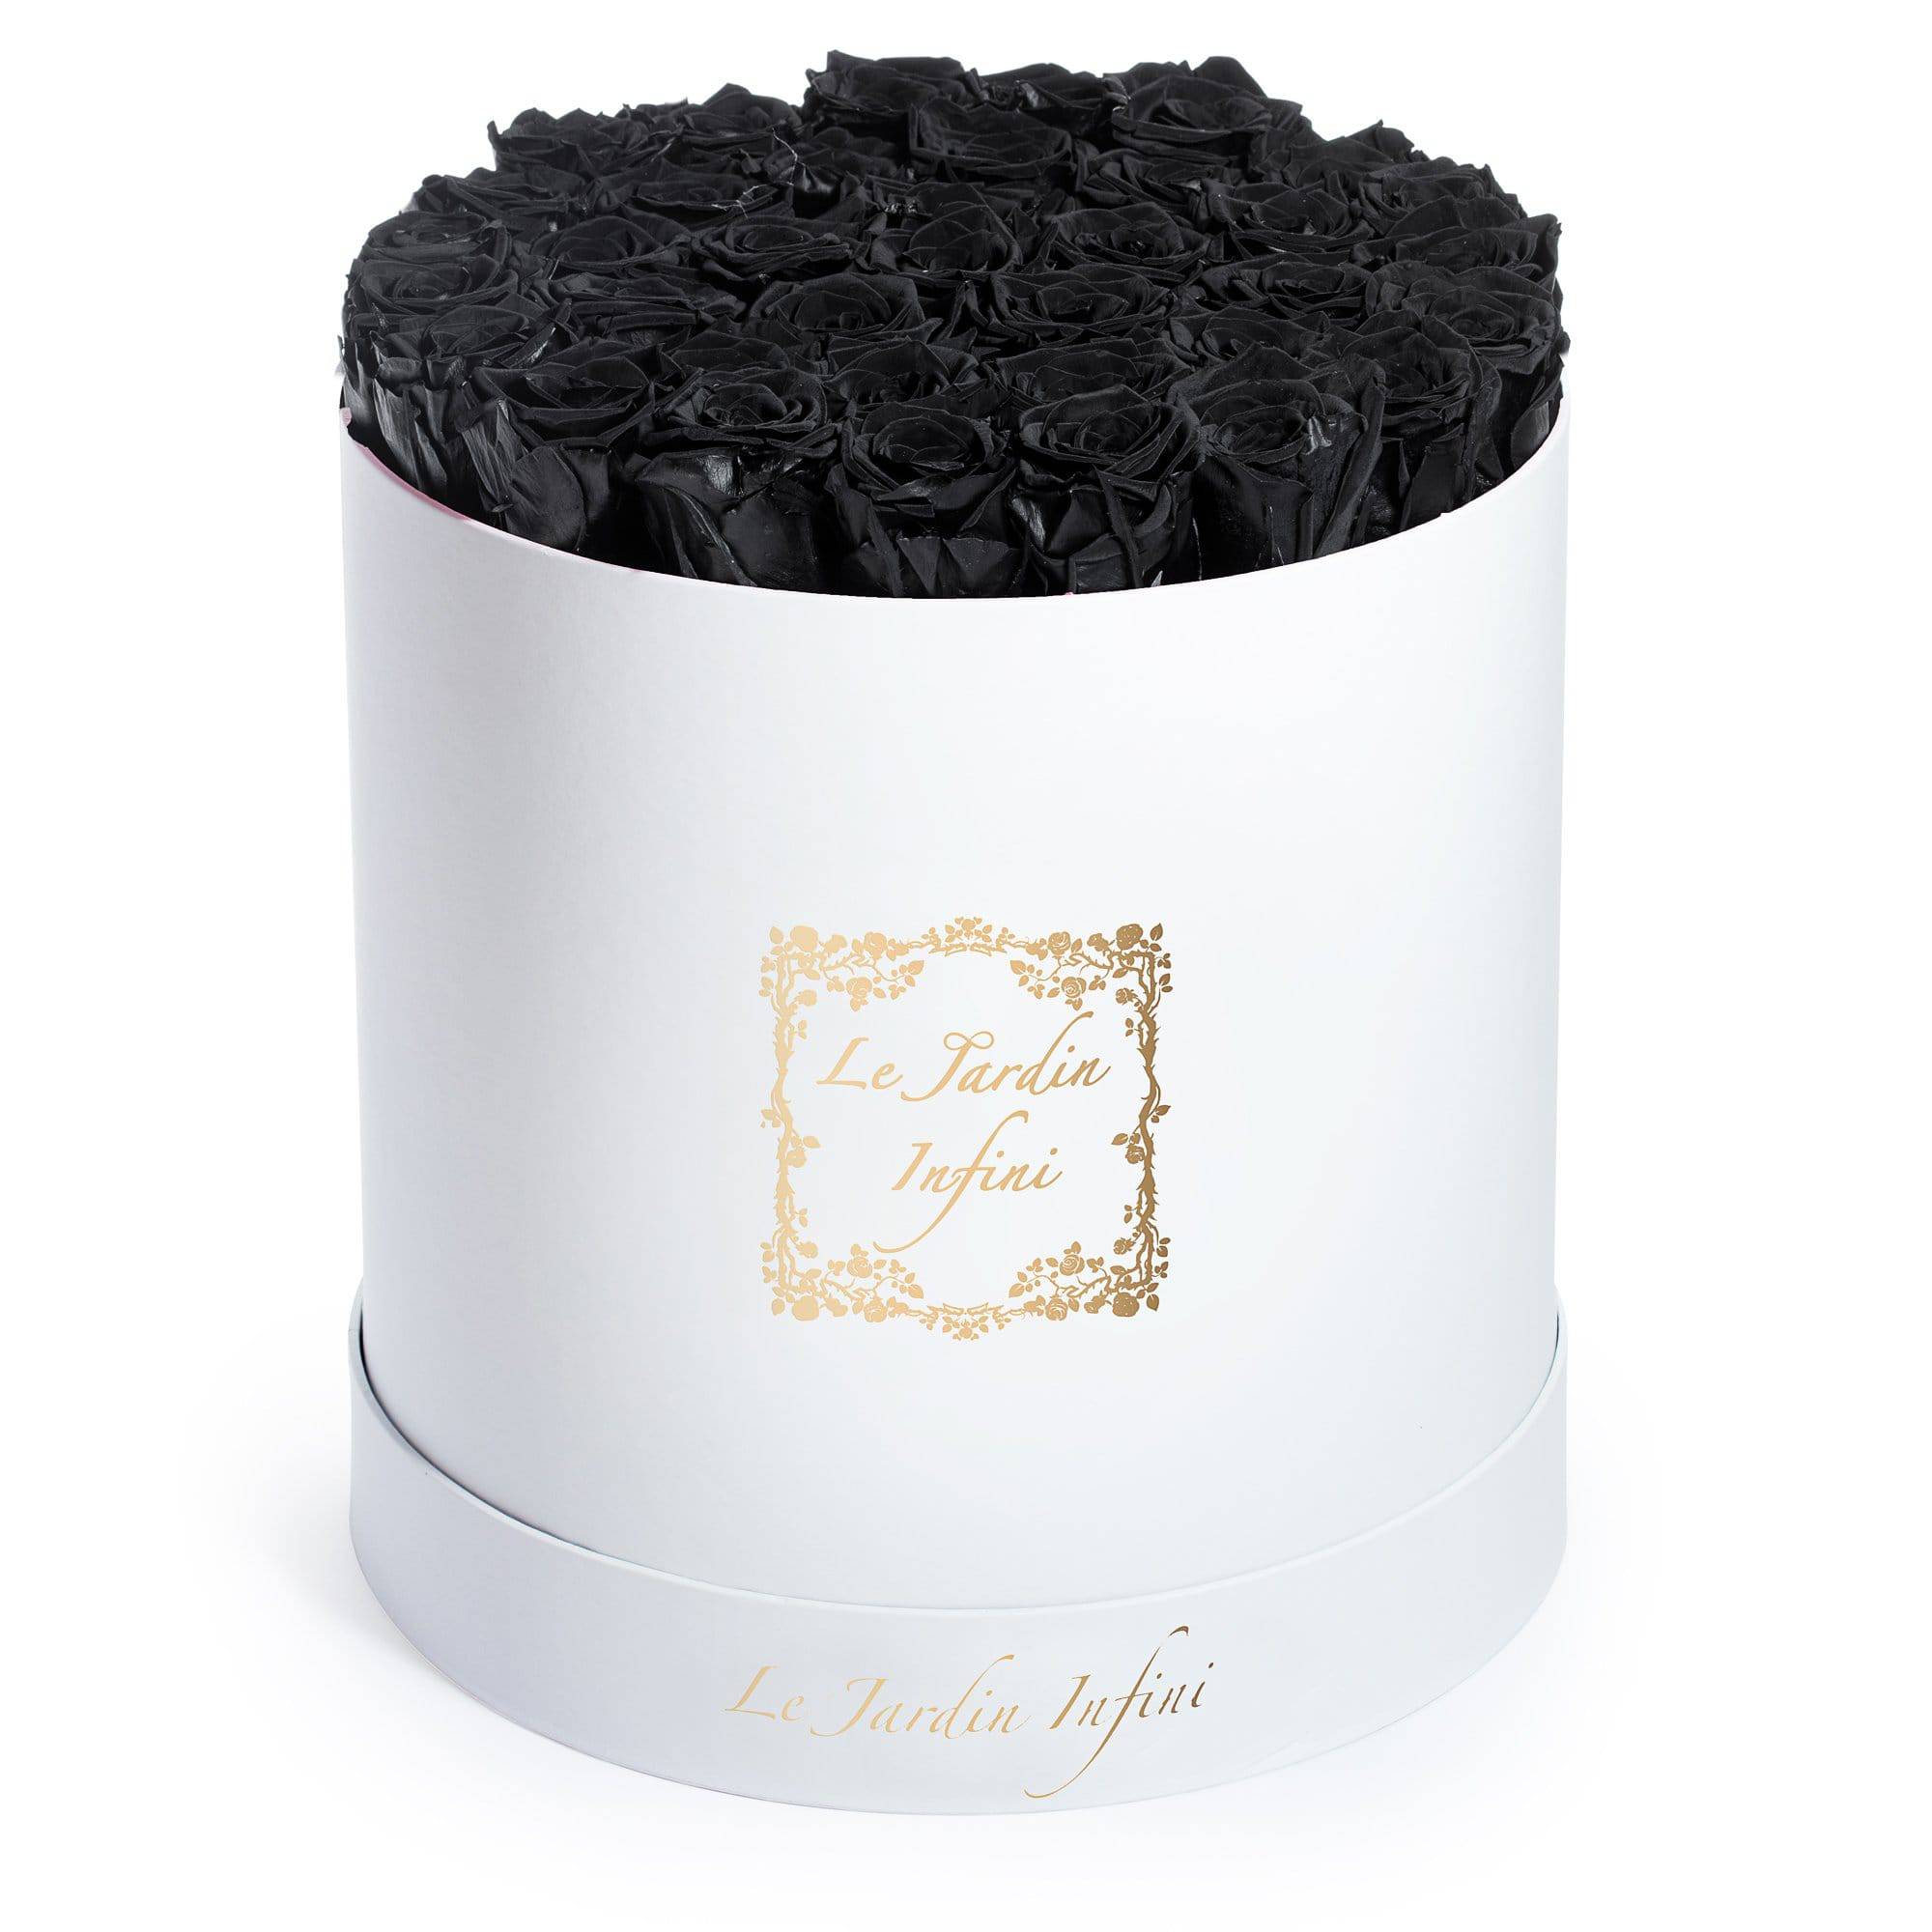 Matte Black Preserved Roses - Large Round White Box - Le Jardin Infini Roses in a Box